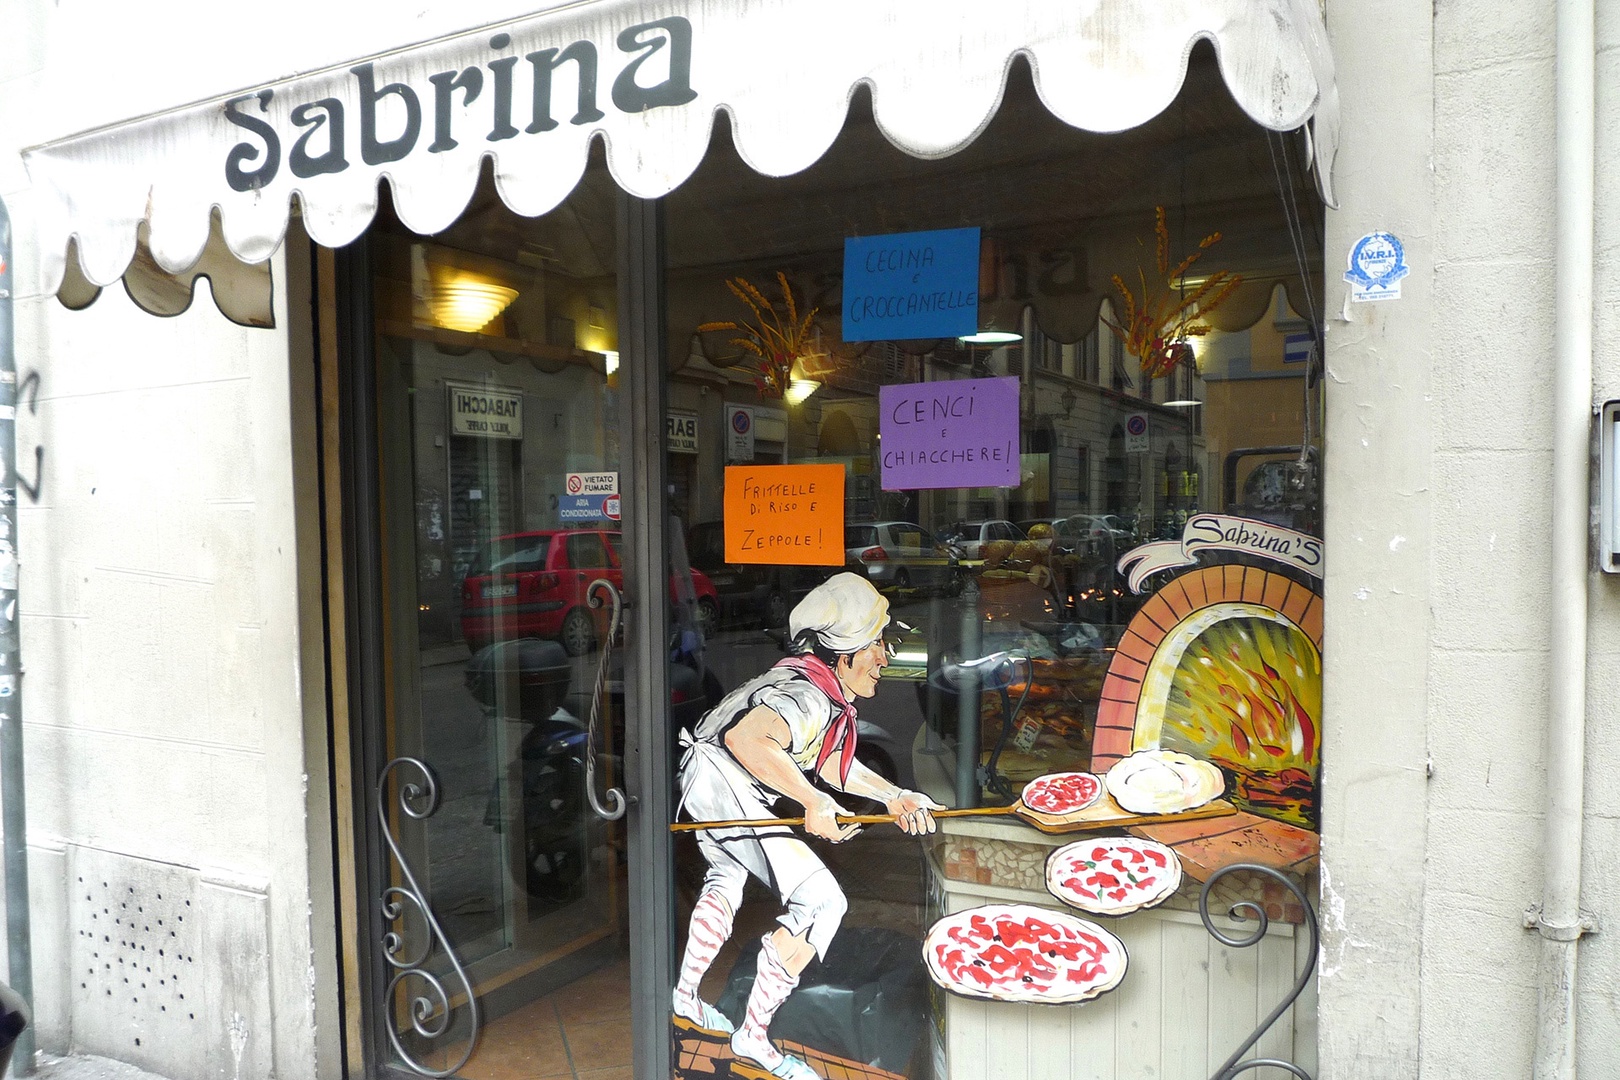 The same bakery at the corner that sells pastries also has good pizza.